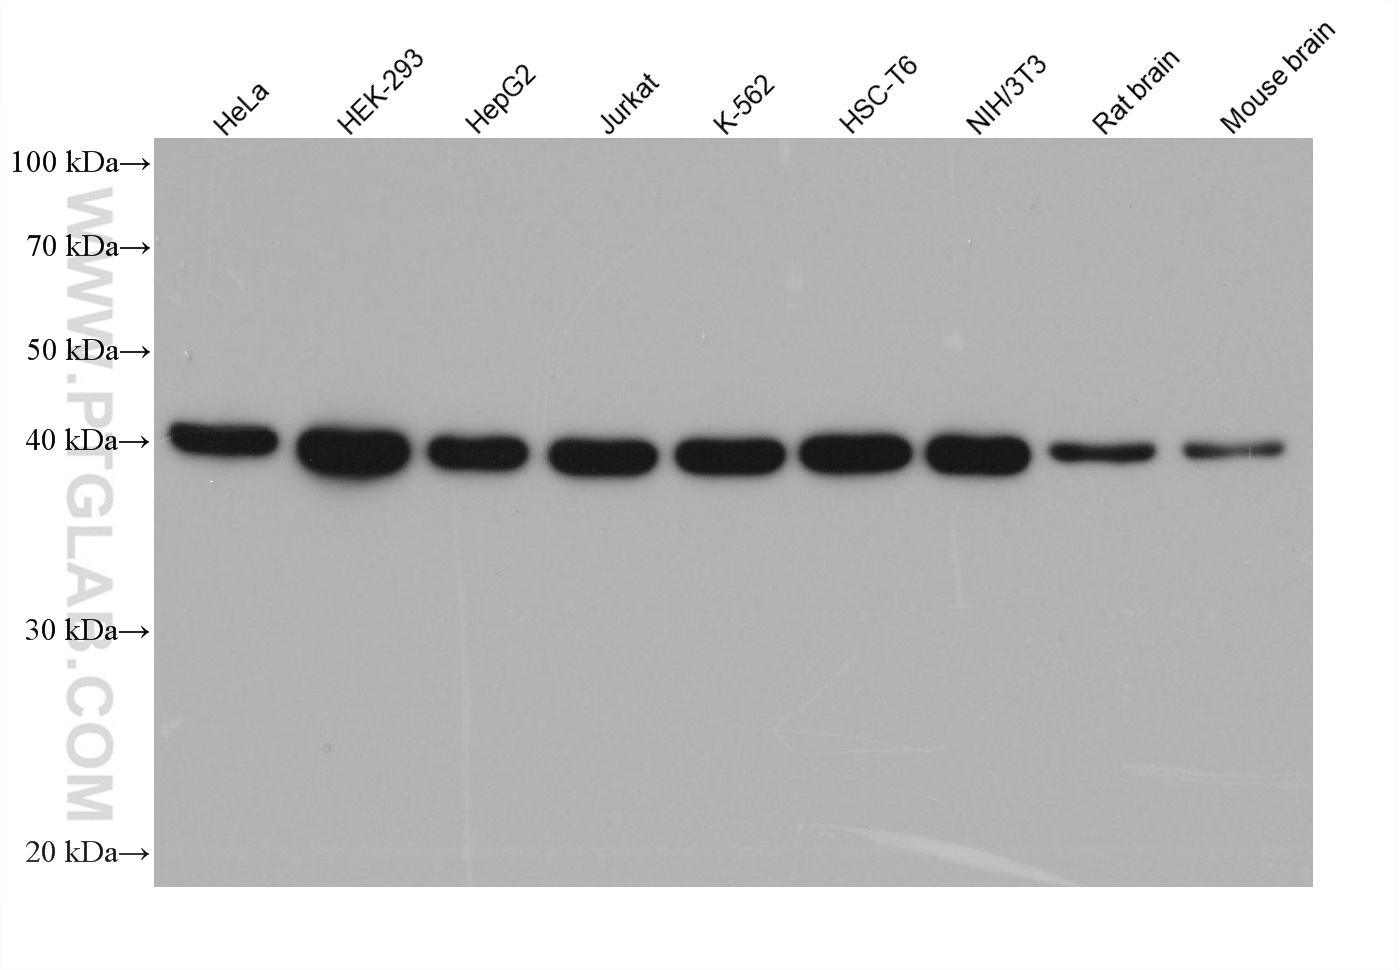 Various lysates were subjected to SDS-PAGE followed by western blot with rabbit anti-TDP43 recombinant antibody (80001-1-RR) at dilution of 1:20000. Multi-rAb HRP-Goat Anti-Rabbit Recombinant Secondary Antibody (H+L) (RGAR001) was used at 1:5000 for detection.